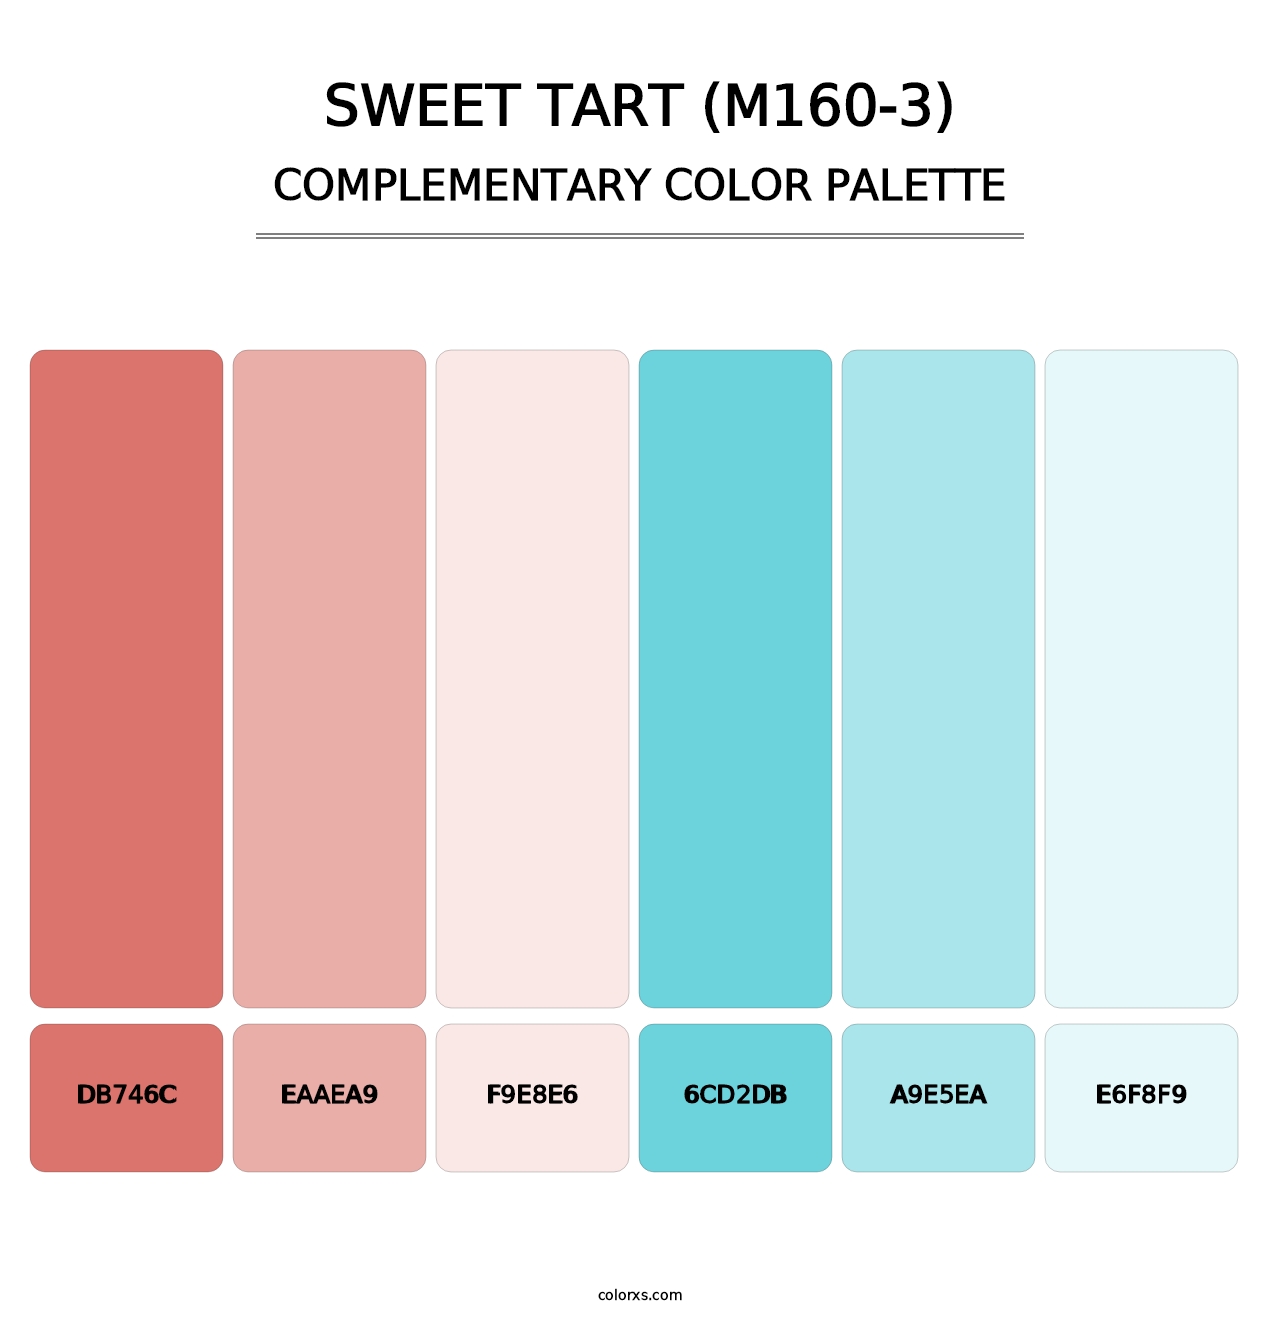 Sweet Tart (M160-3) - Complementary Color Palette